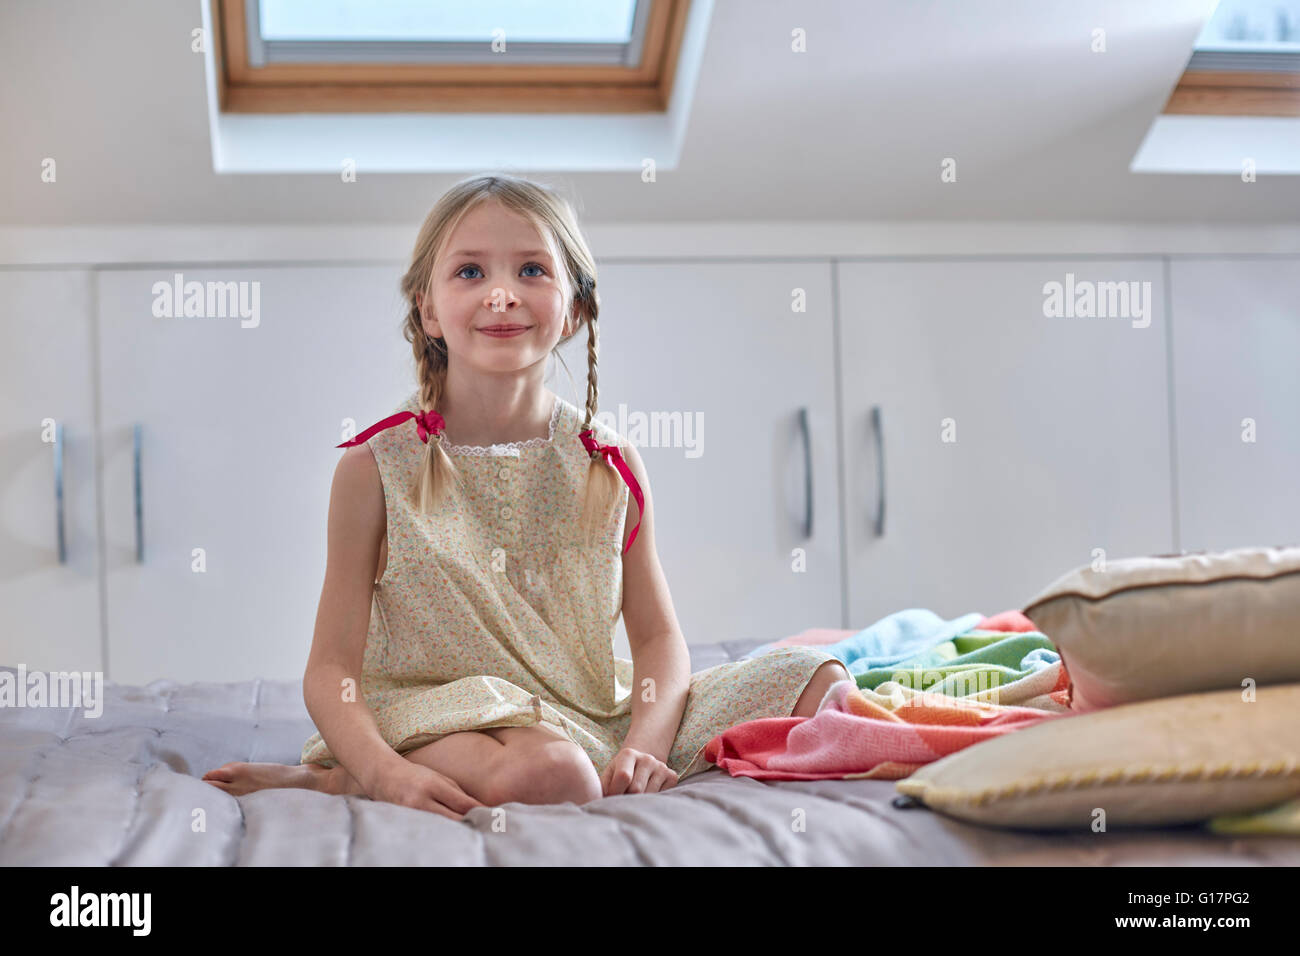 Girl sitting on bed in loft room Stock Photo